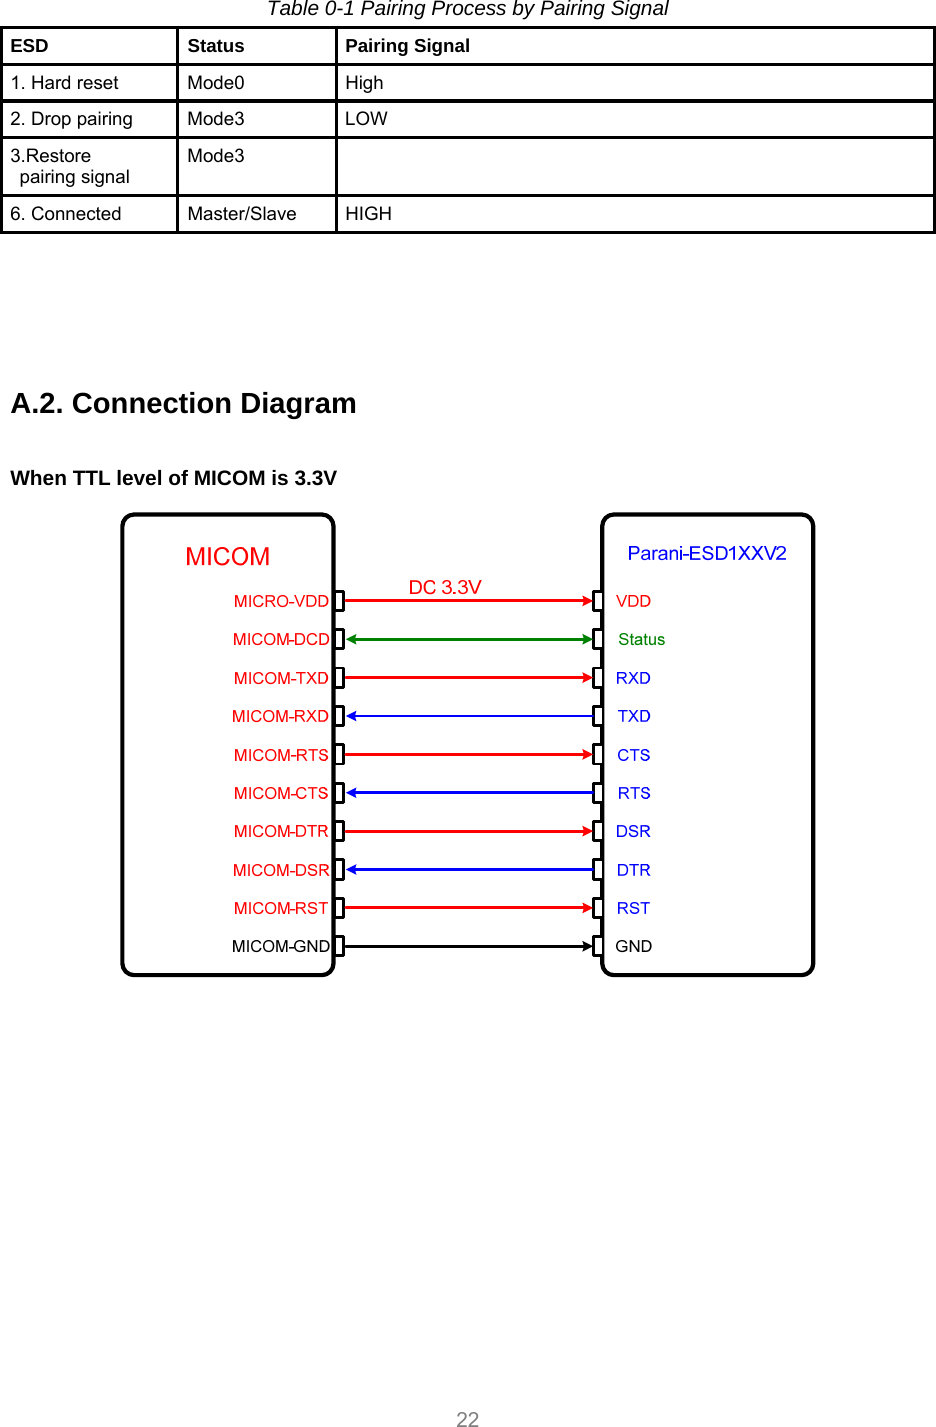     22 Table 0-1 Pairing Process by Pairing Signal ESD Status Pairing Signal 1. Hard reset  Mode0  High 2. Drop pairing    Mode3  LOW 3.Restore  pairing signal Mode3  6. Connected  Master/Slave  HIGH     A.2. Connection Diagram  When TTL level of MICOM is 3.3V   